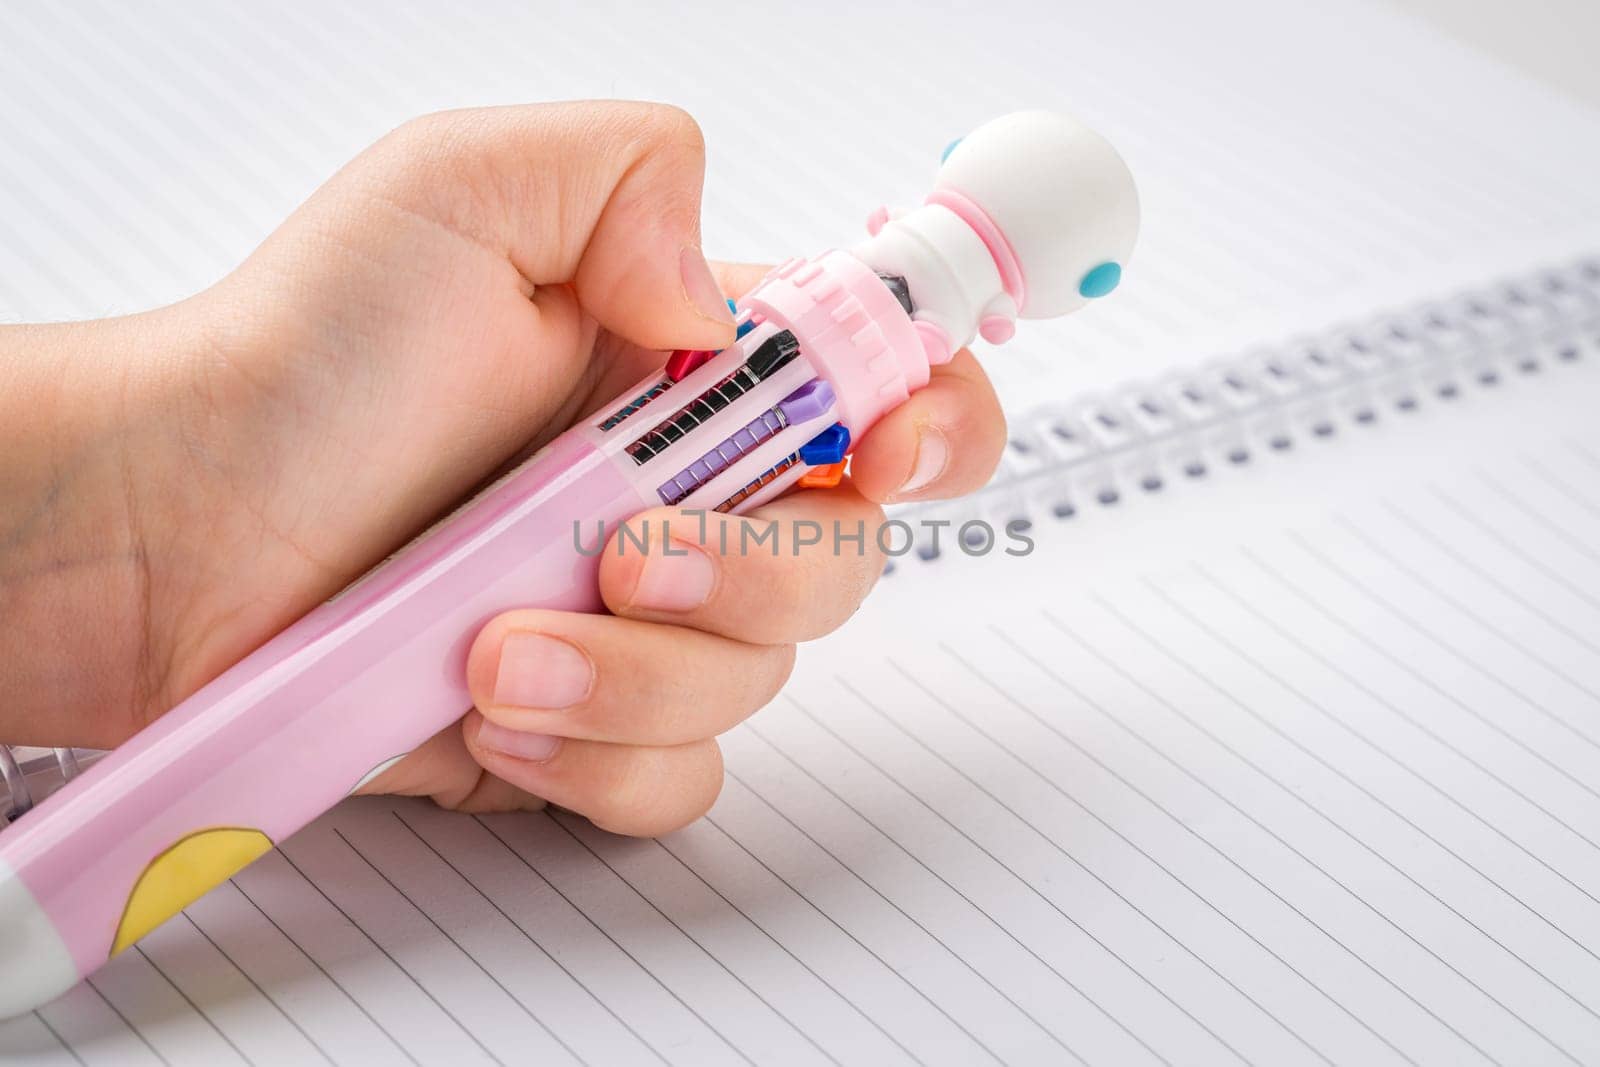 Little girl chooses color from a pen that can write in different colors